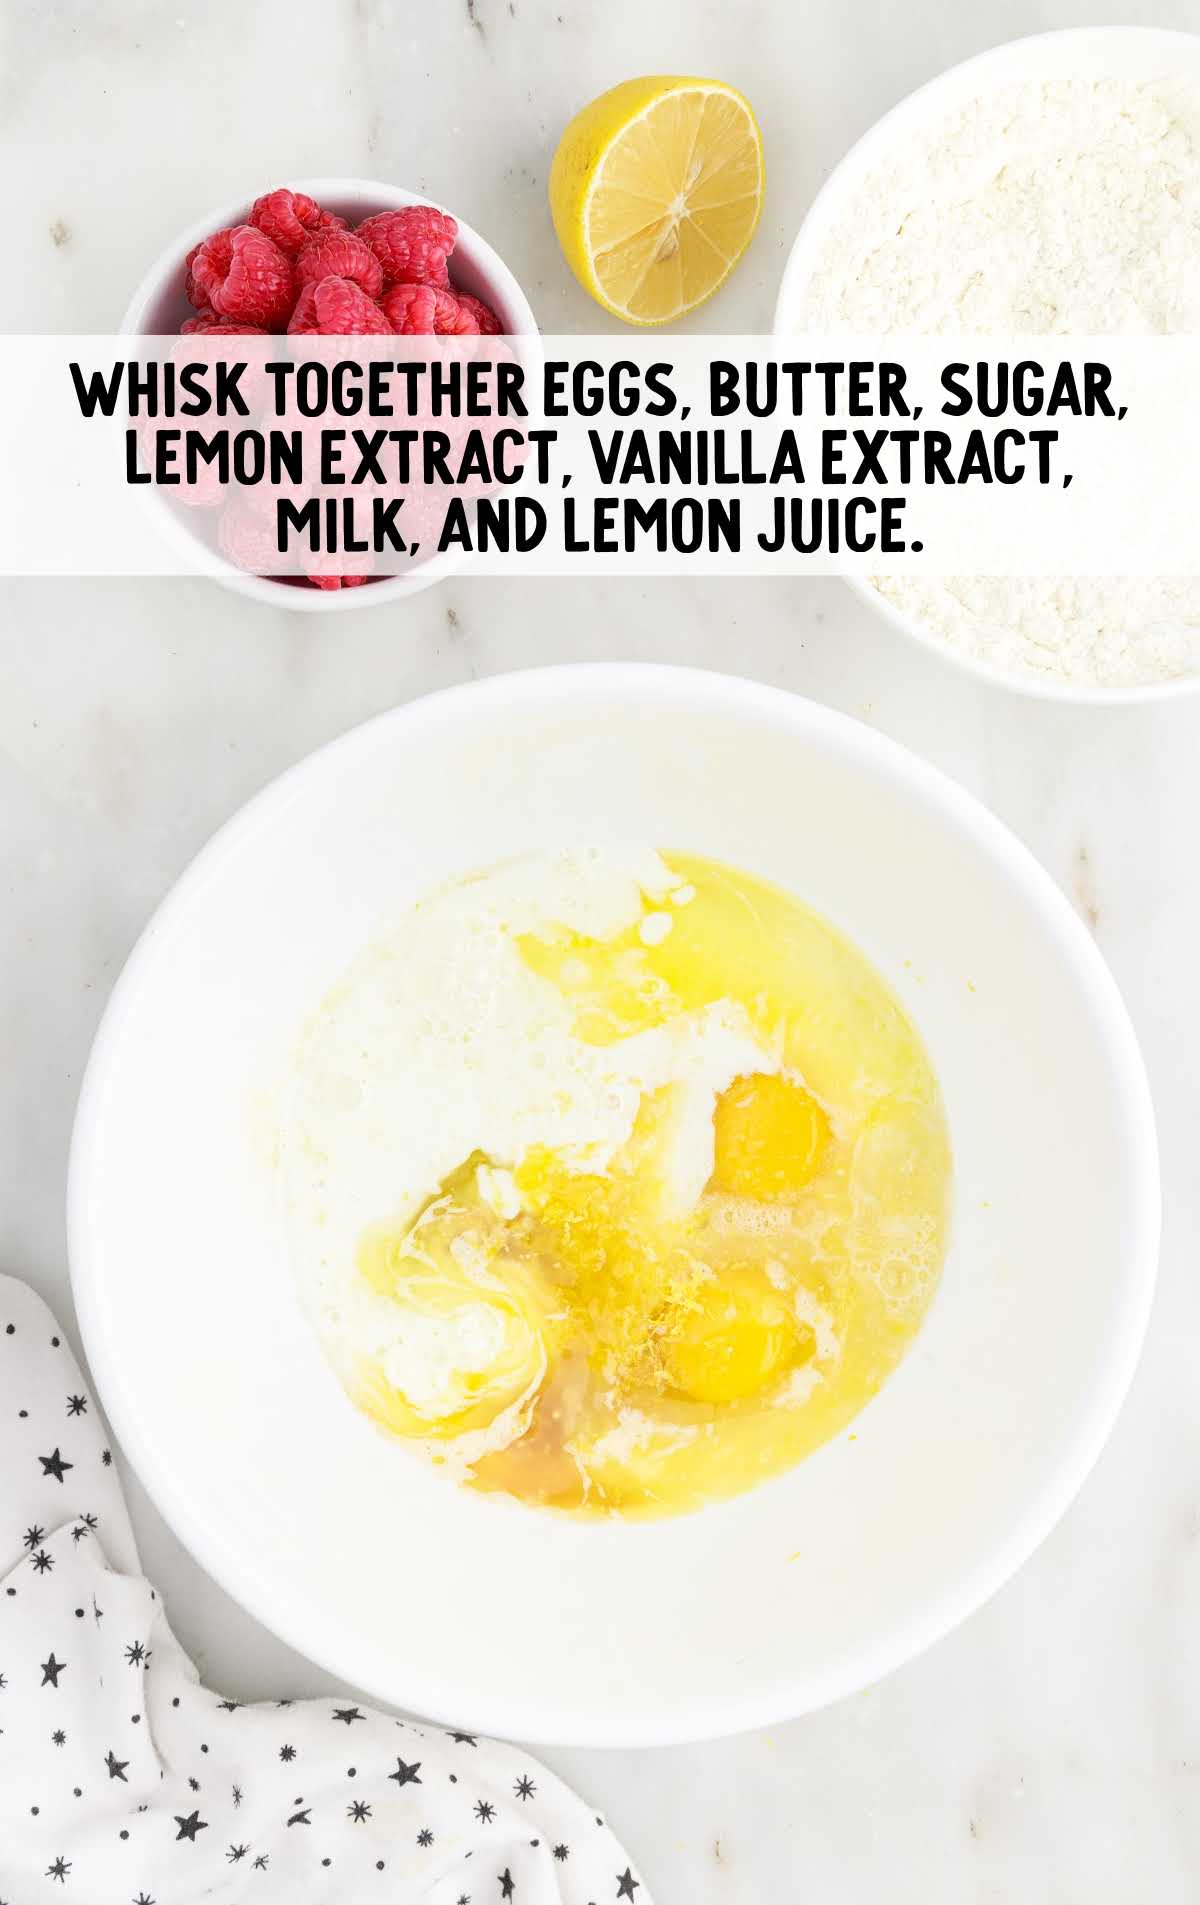 eggs, butter, sugar, lemon extract, vanilla extract, milk, and lemon juice whisked together